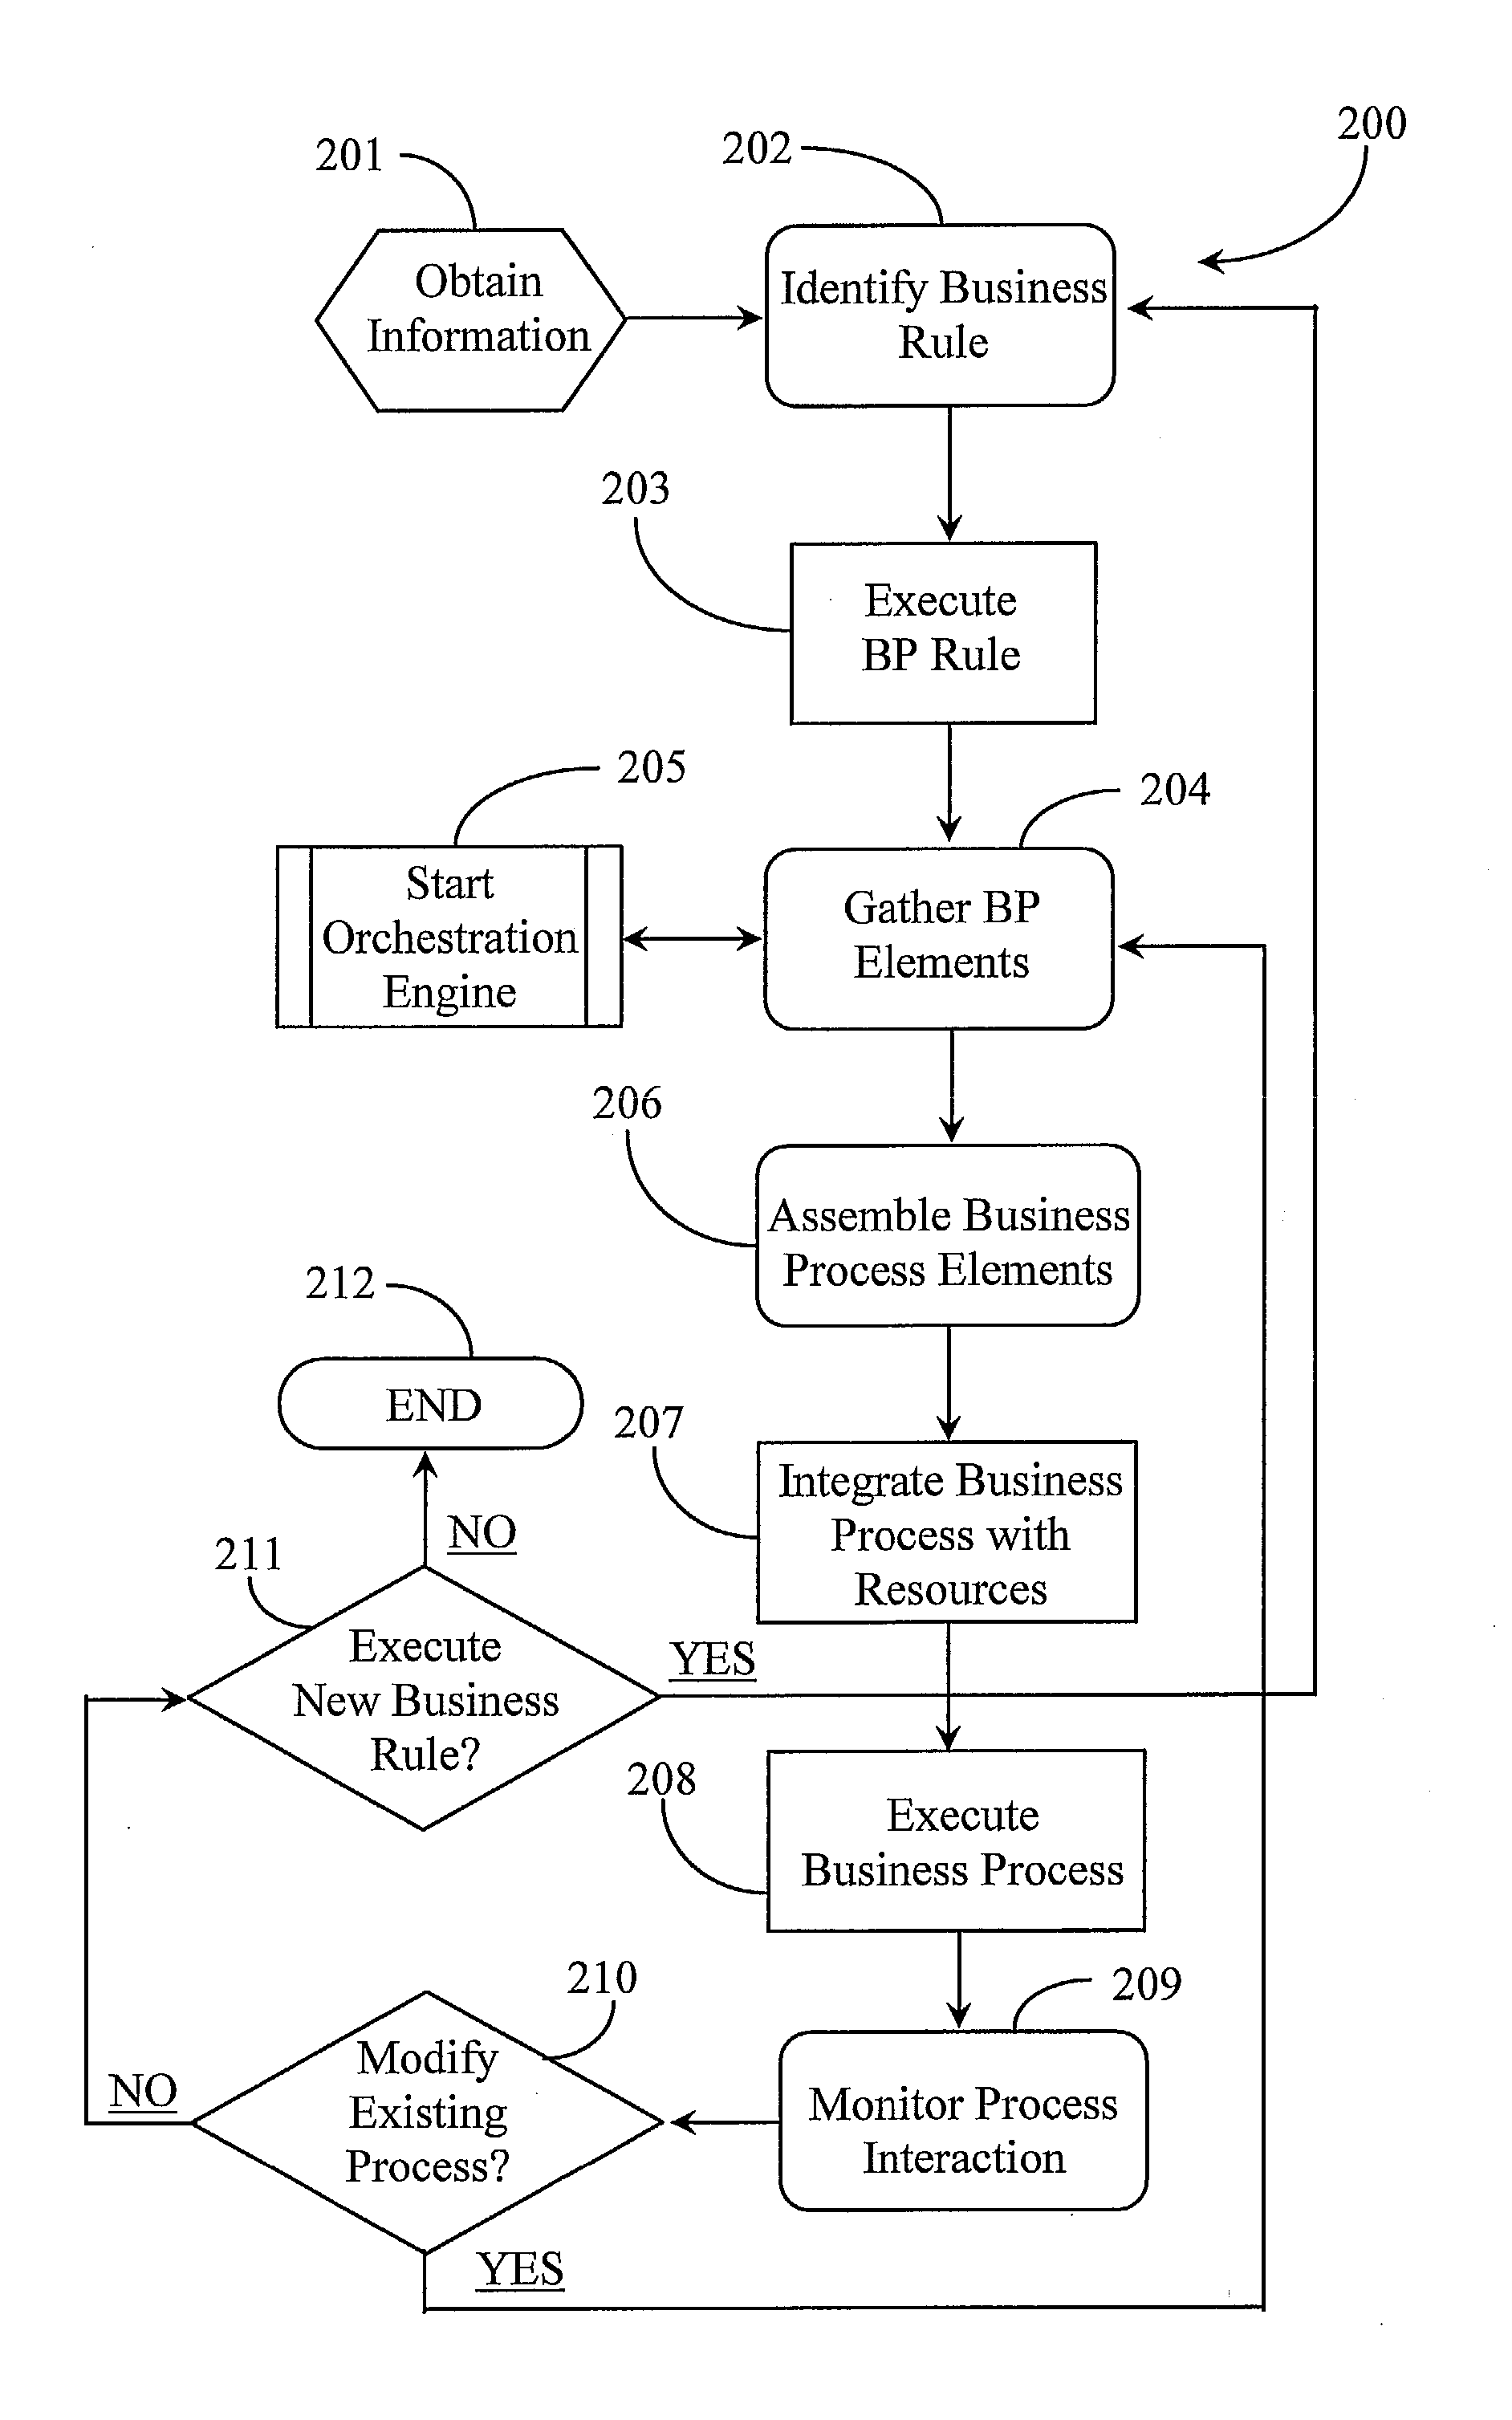 Method for Assembling a Business Process and for Orchestrating the Process Based on Process Beneficiary Information